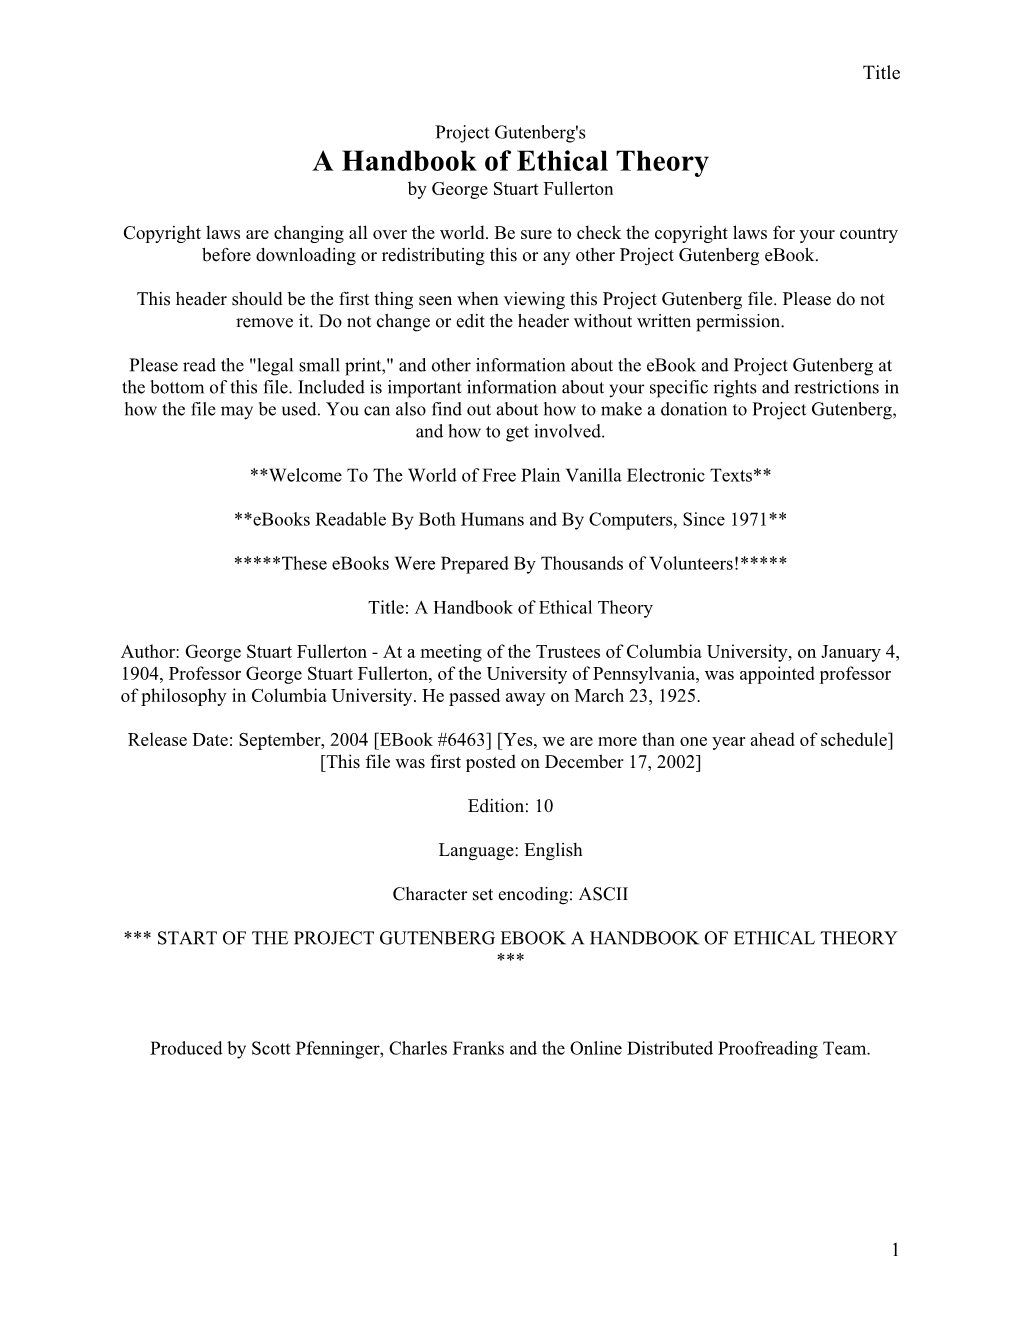 Project Gutenberg's a Handbook of Ethical Theory, By